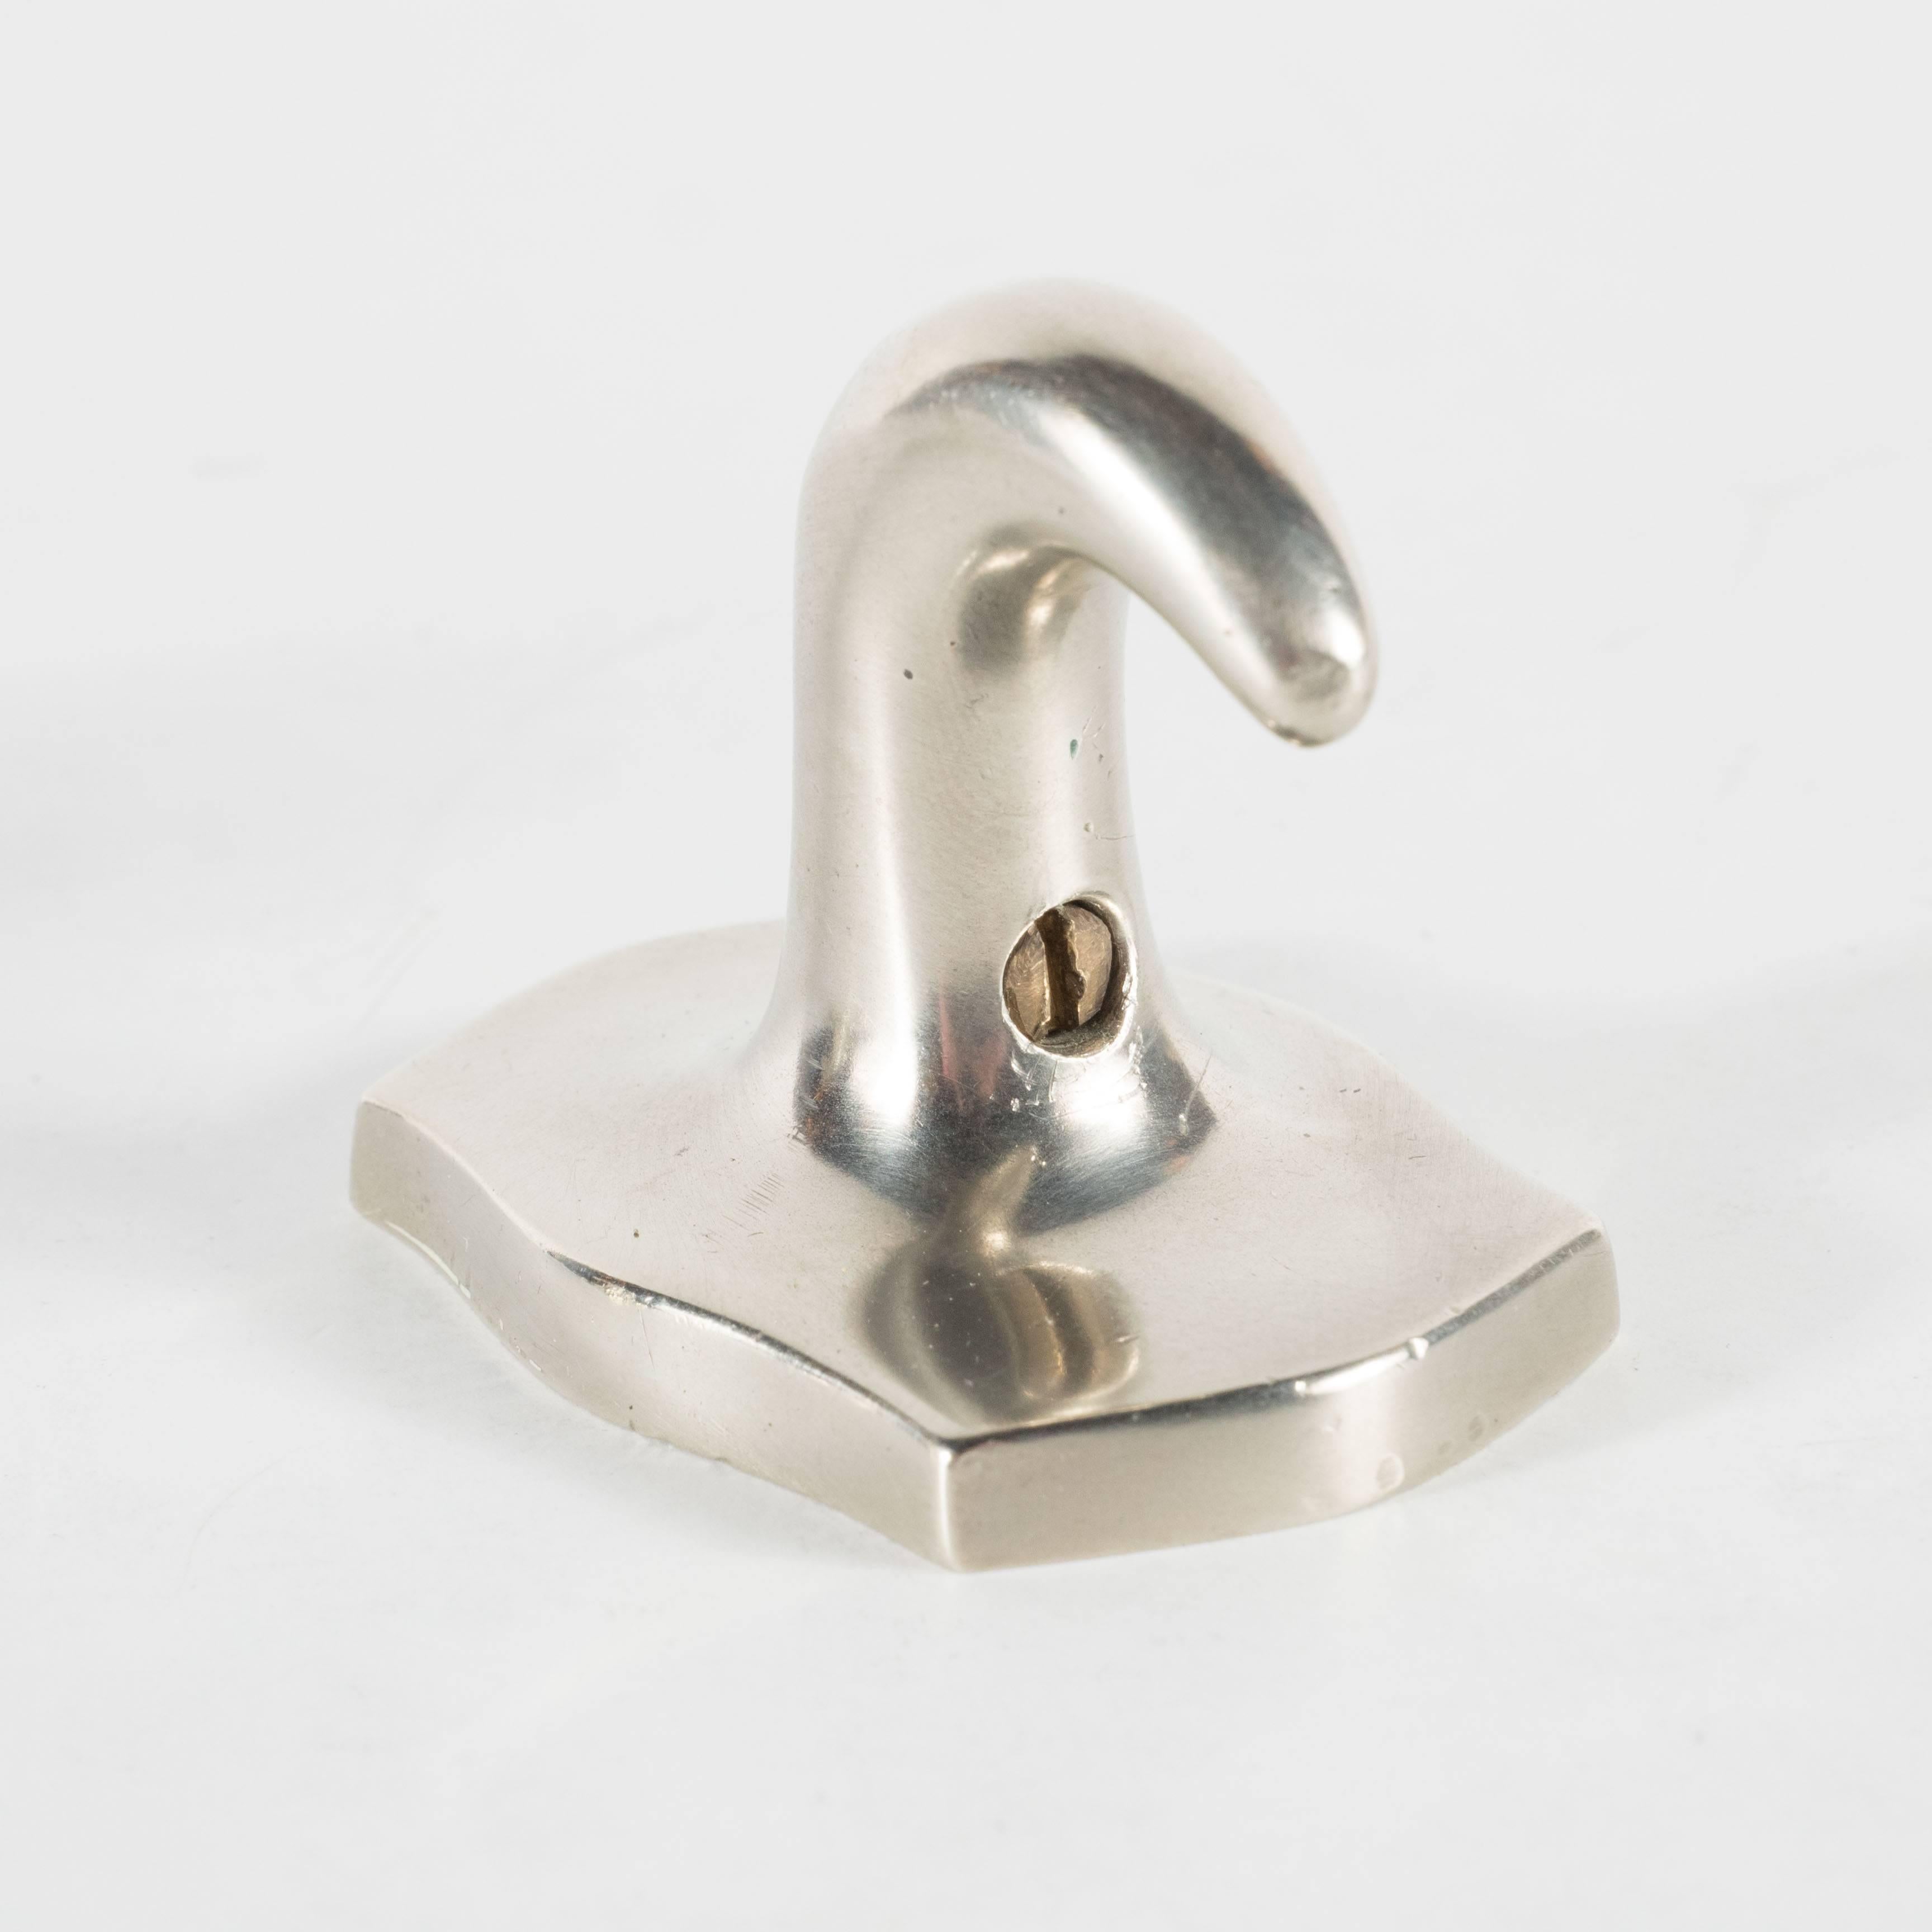 Mid-Century Modernist pair of elegant towel hooks in brushed nickel with interesting shaped stylized wall mounts bases all in highly finished nickel, the simple yet elegant design is highly reminiscent of the Art Deco period, in excellent